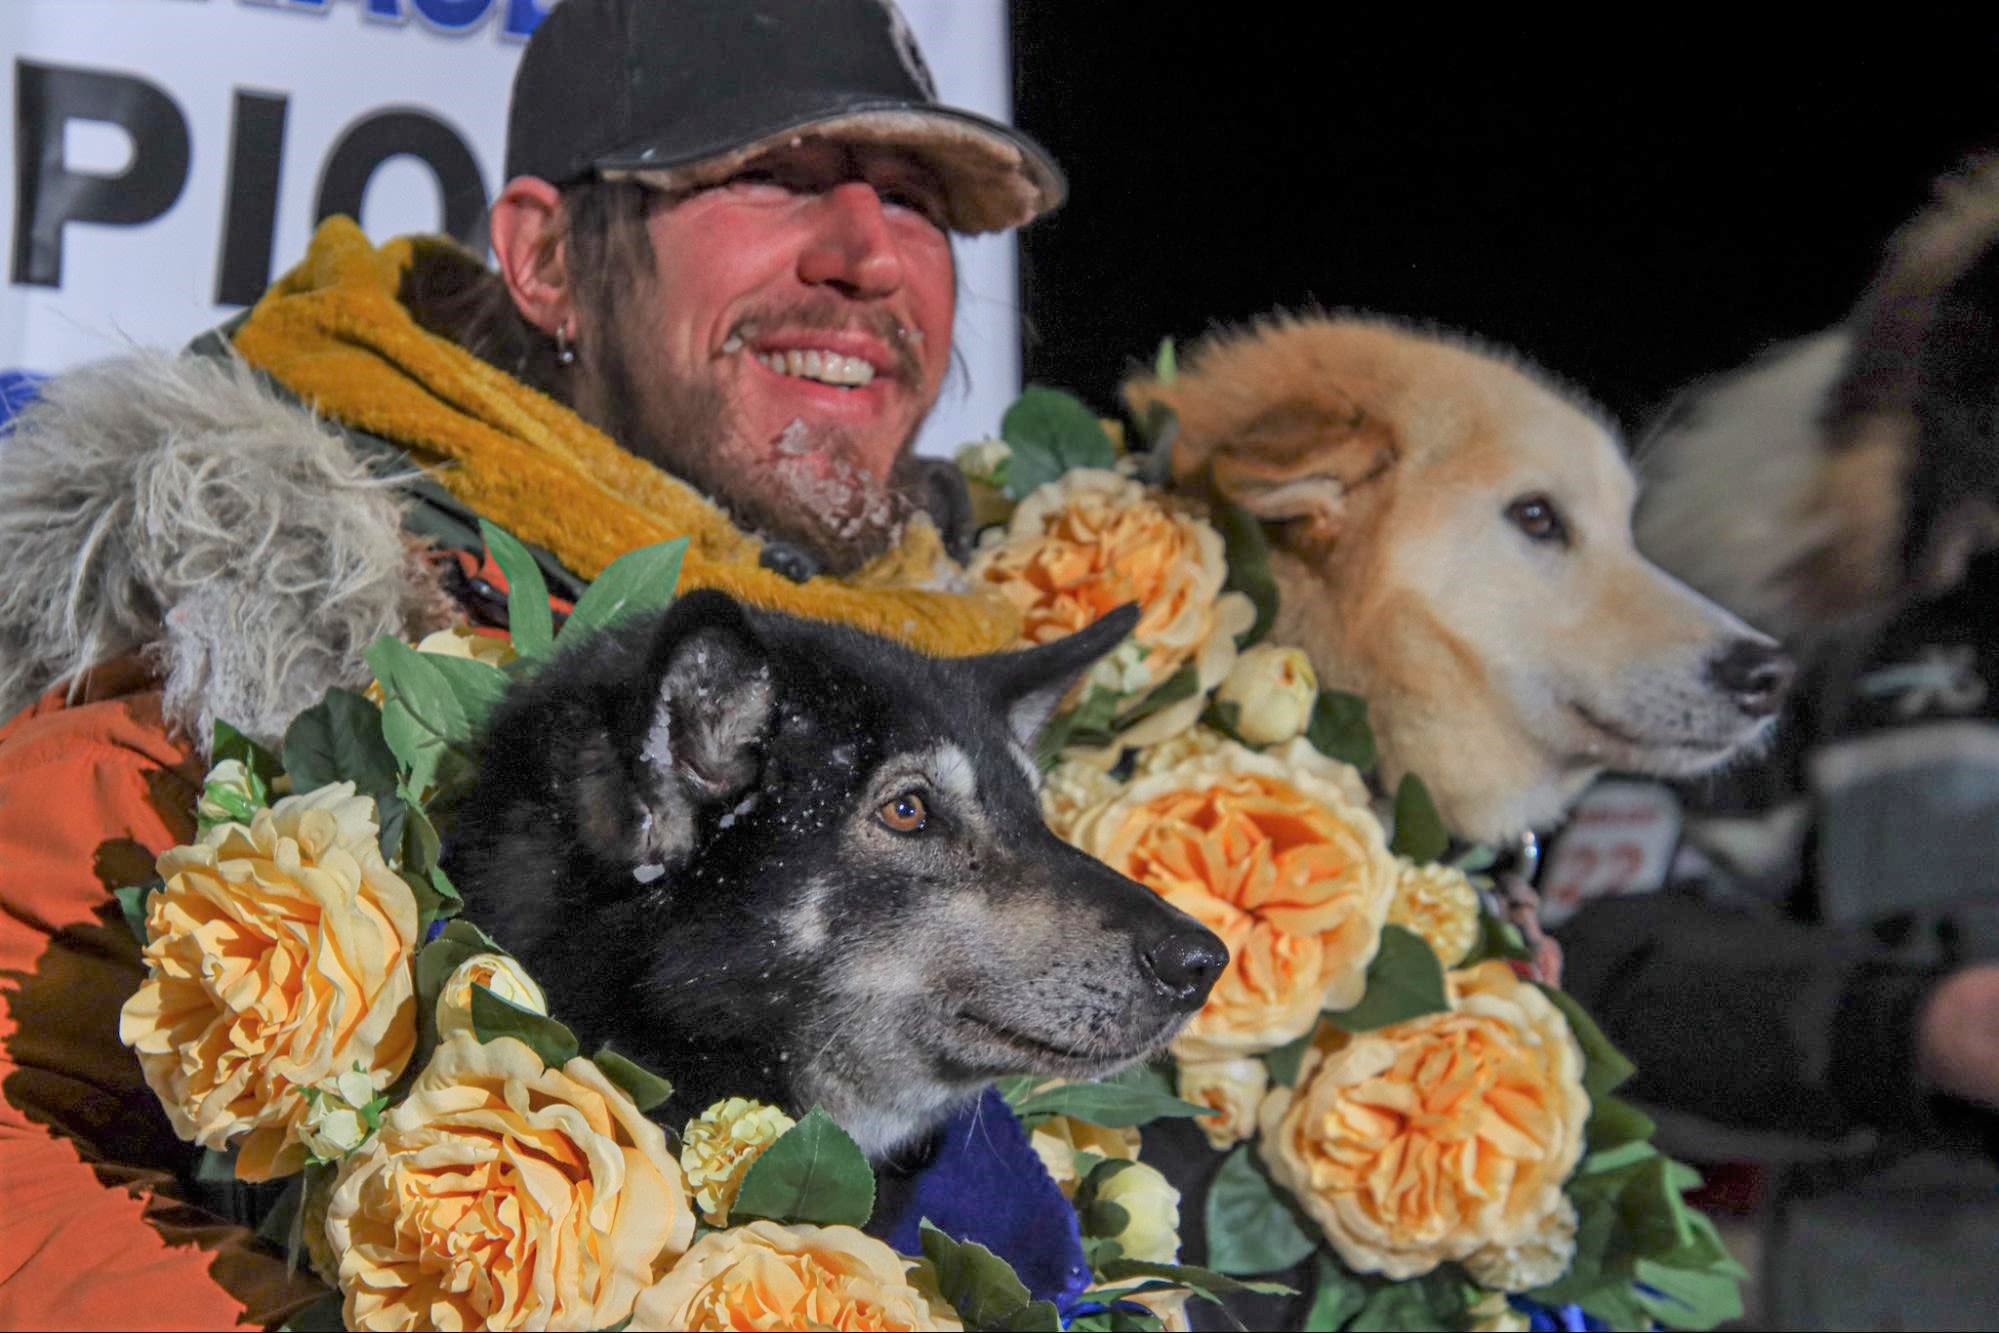 Brent Sass to retire from sled dog racing months after sex assault allegations